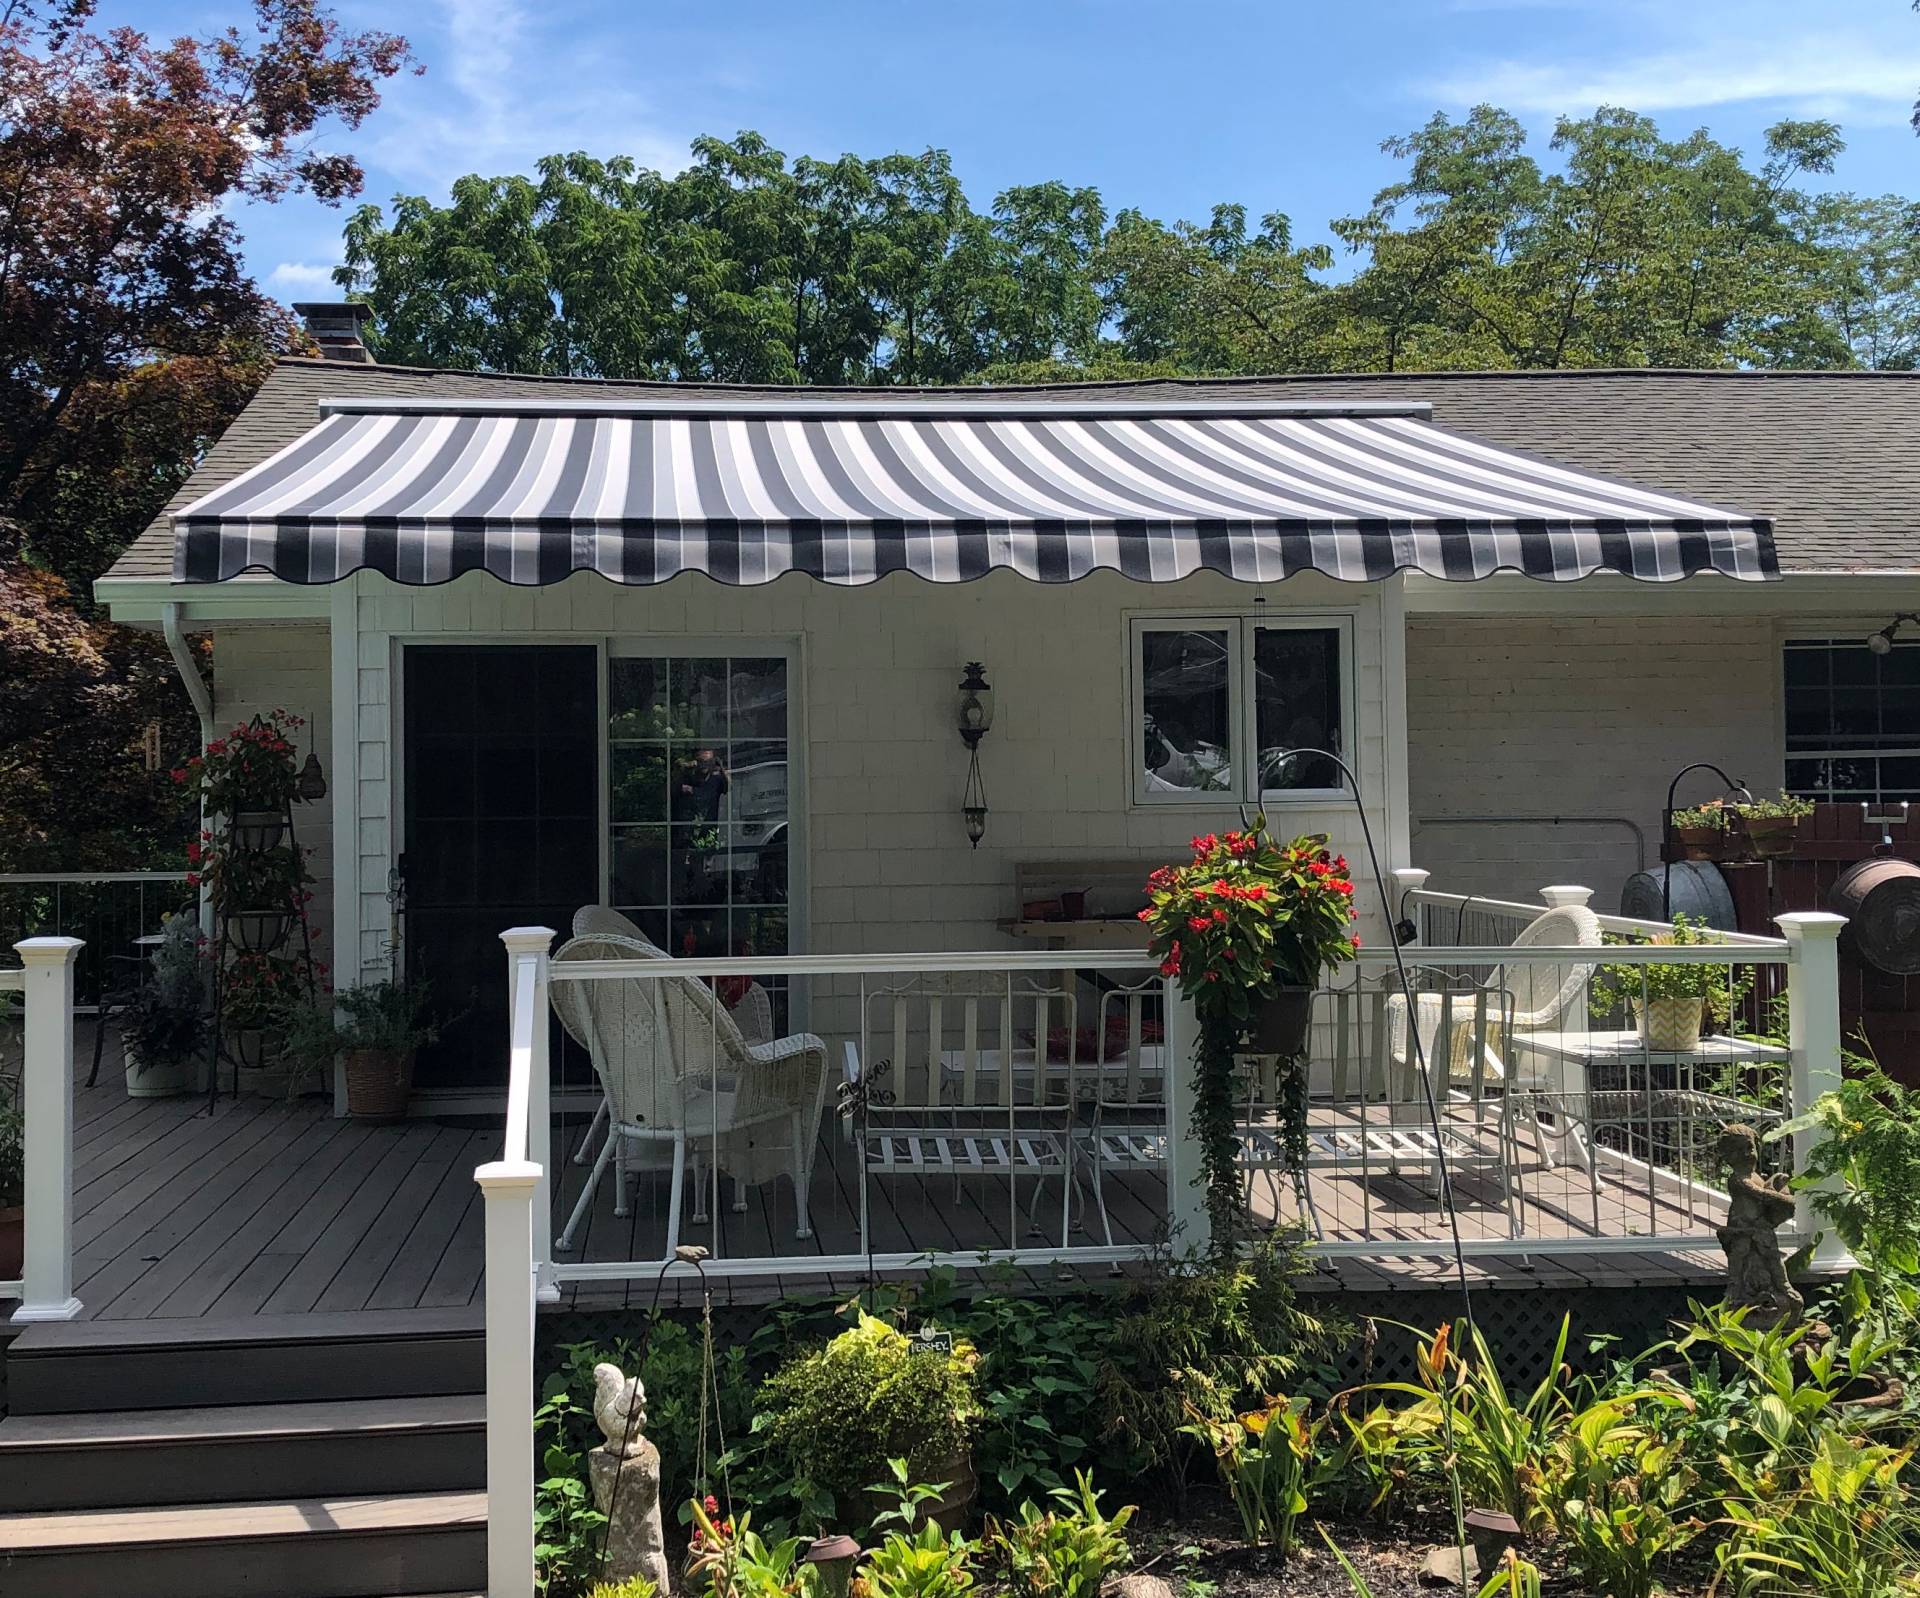 Eastern "Sunflex" retractable awning roof mounted Kreider's Canvas Service, Inc.